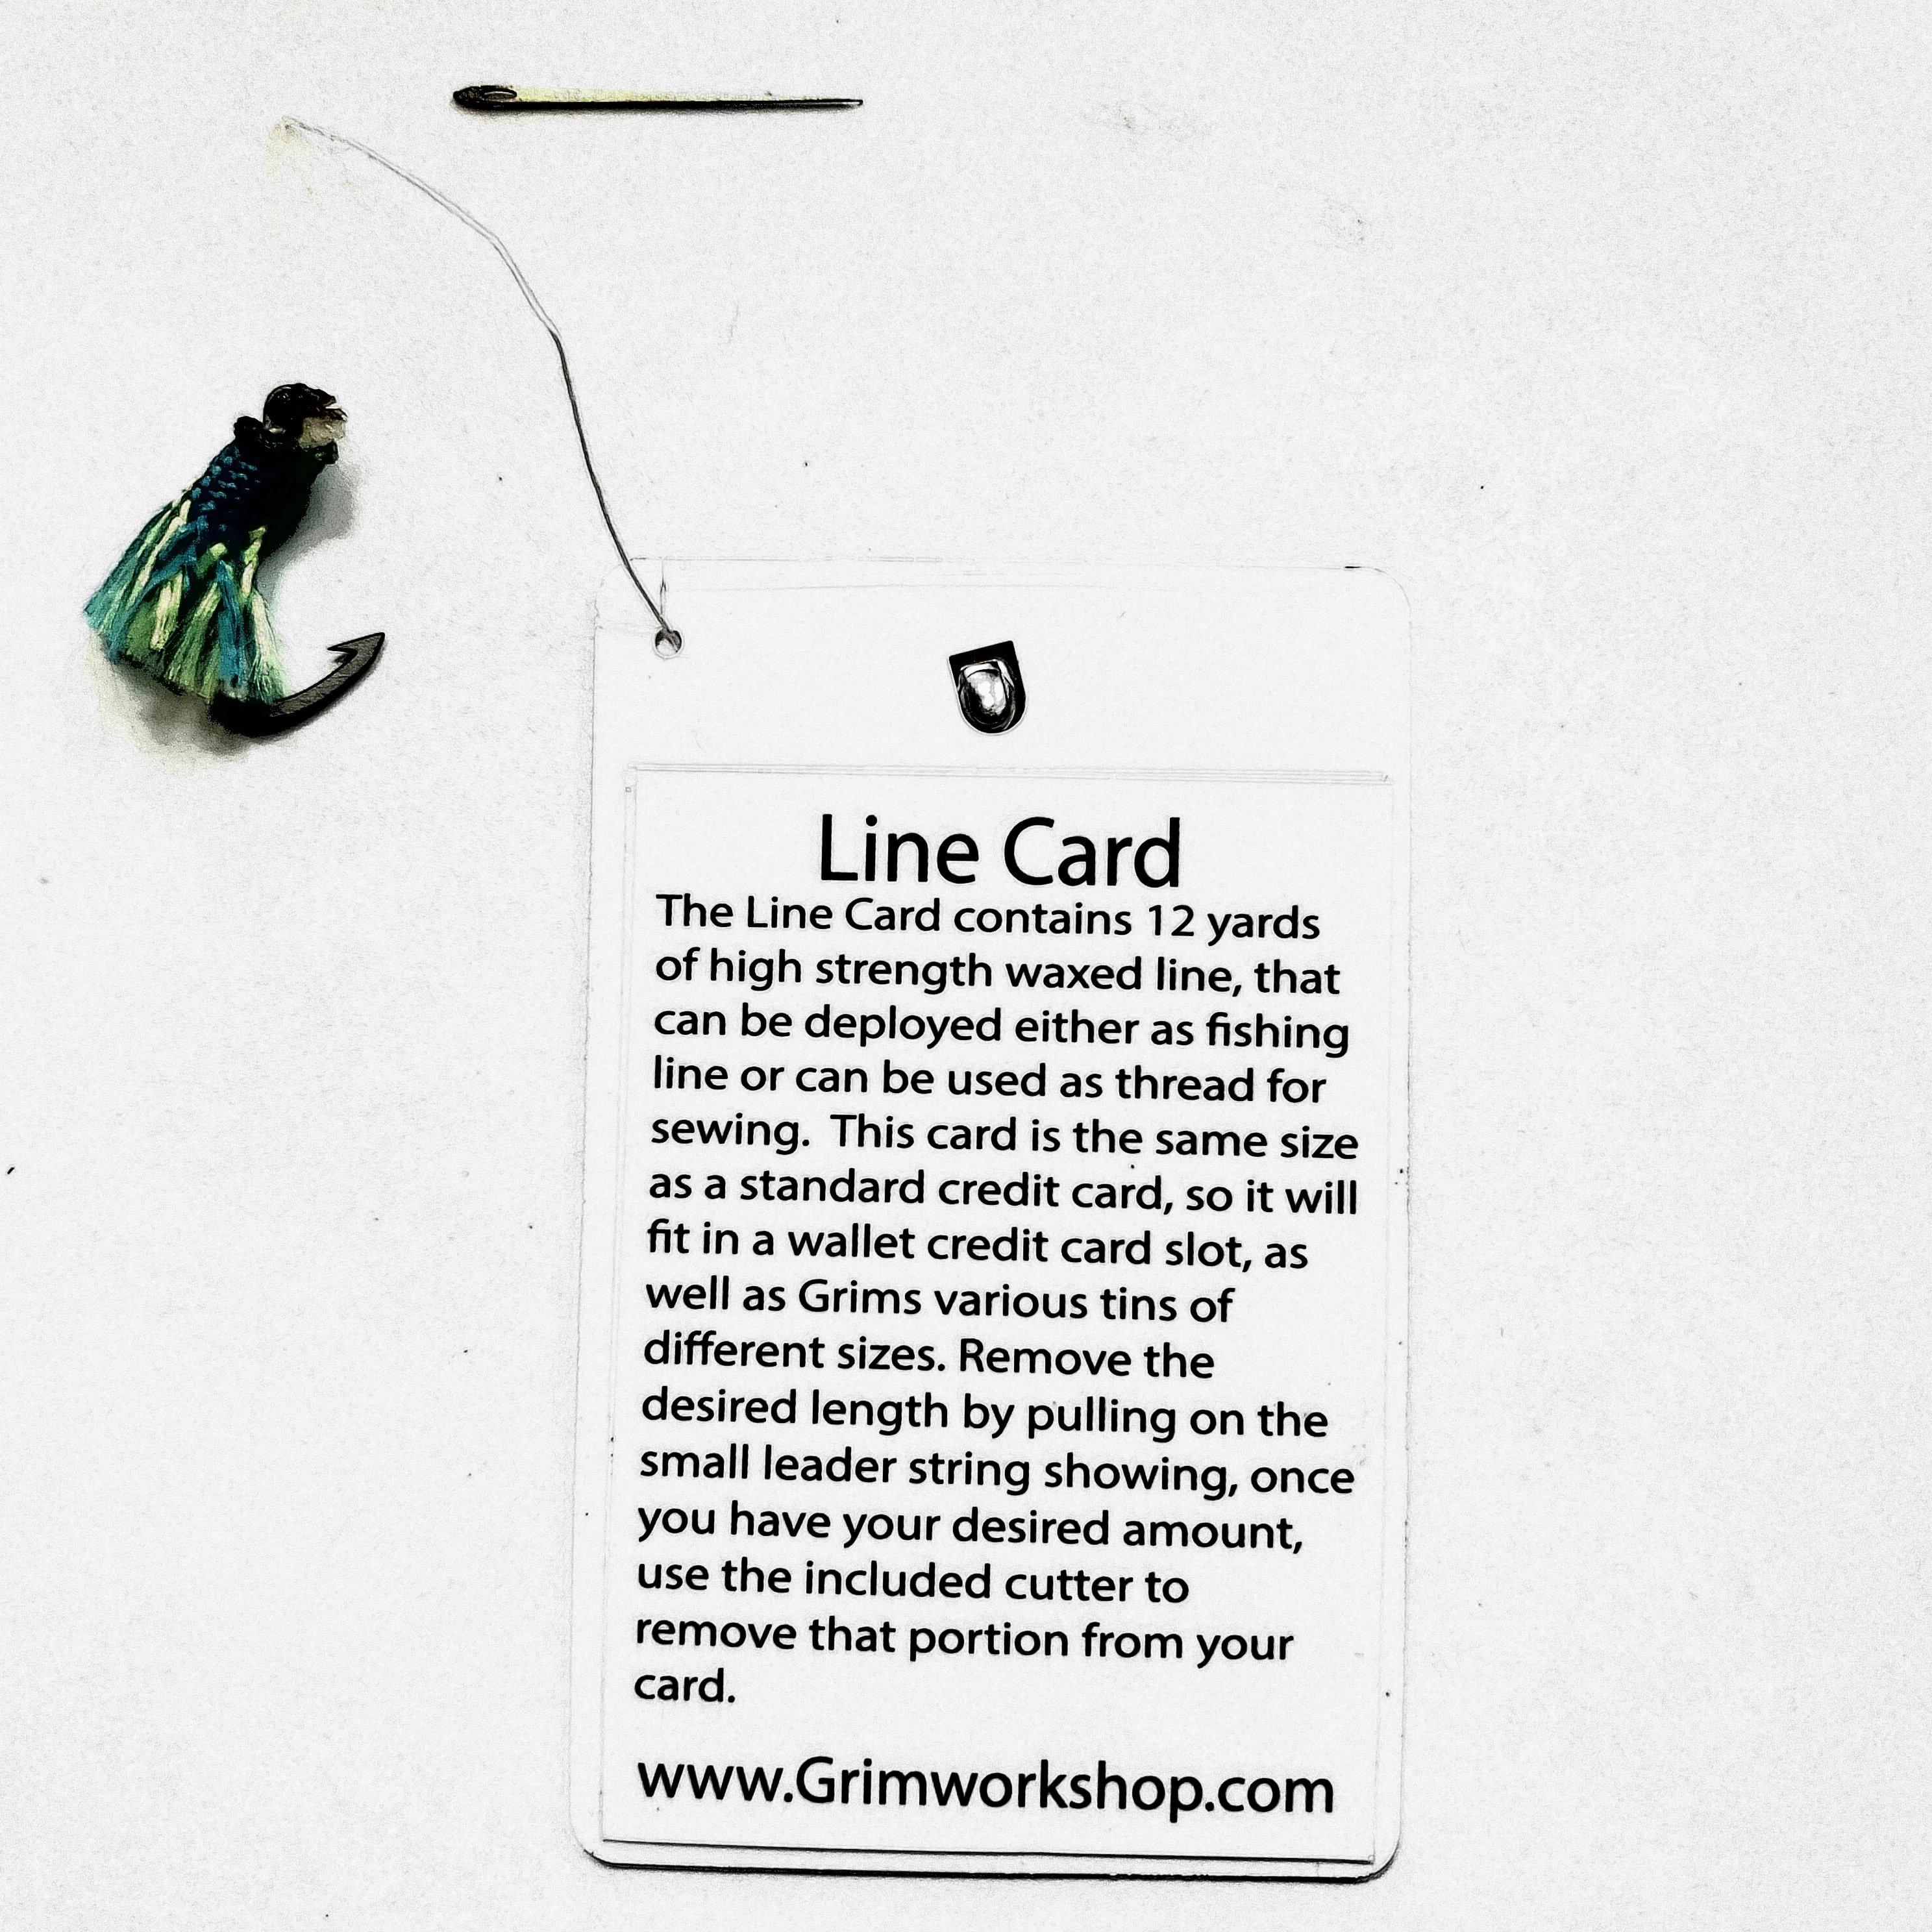 Line Card Deployable Survival Cord for Fishing Line or Thread